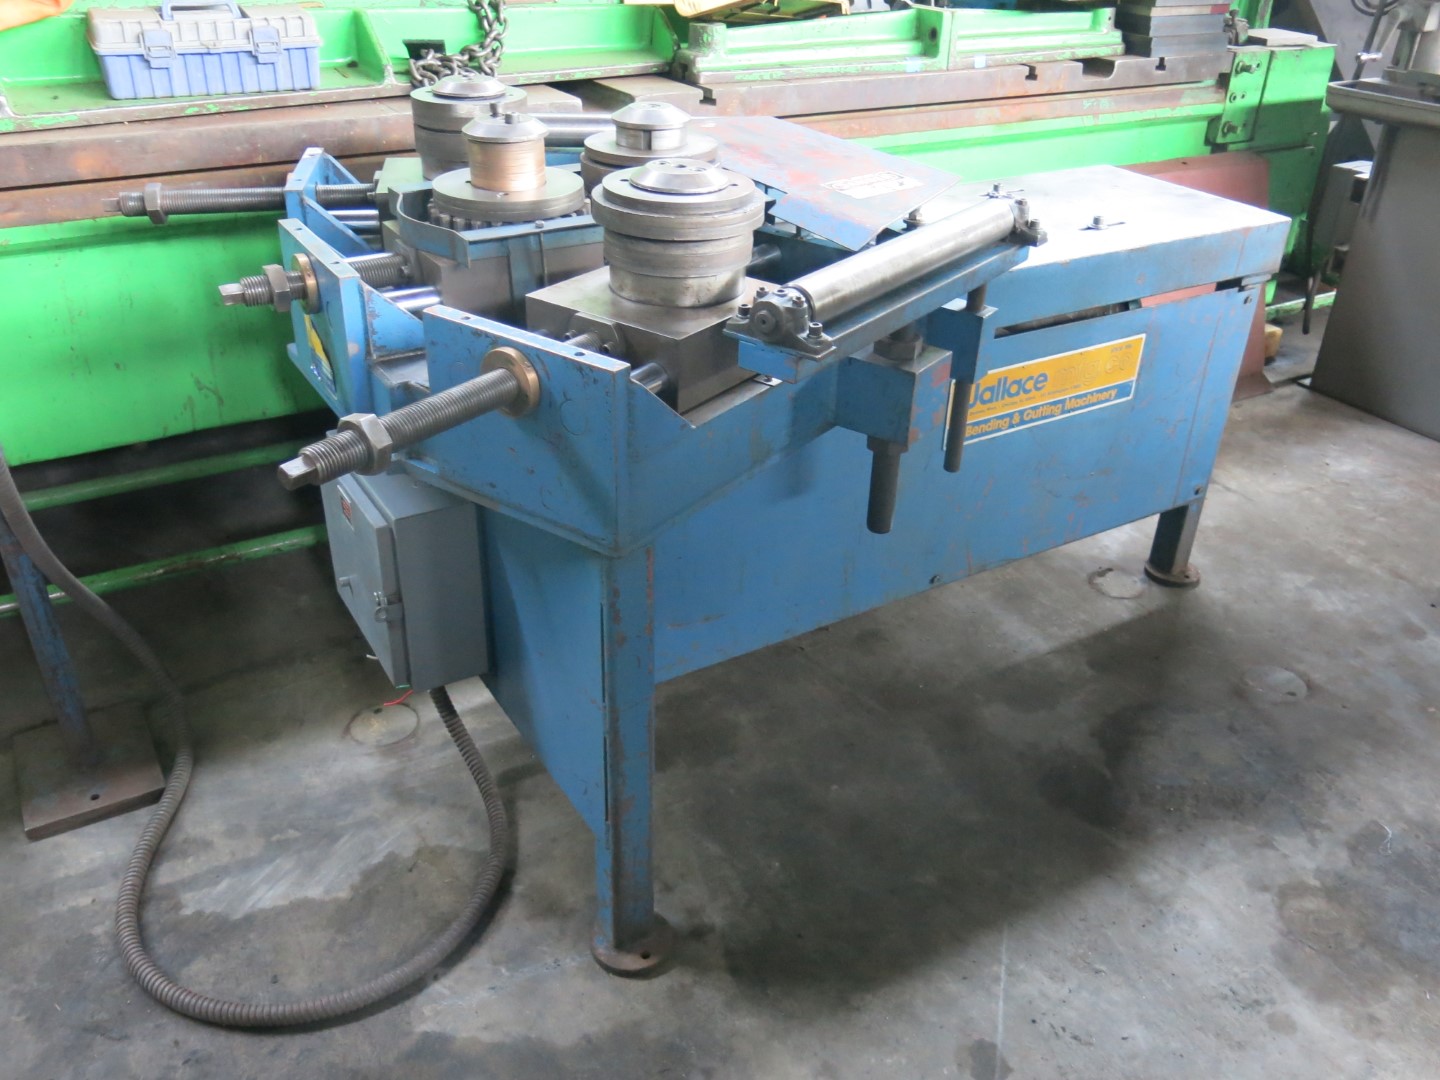 Wallace 4 Roll Angle & Tube Bending Roll